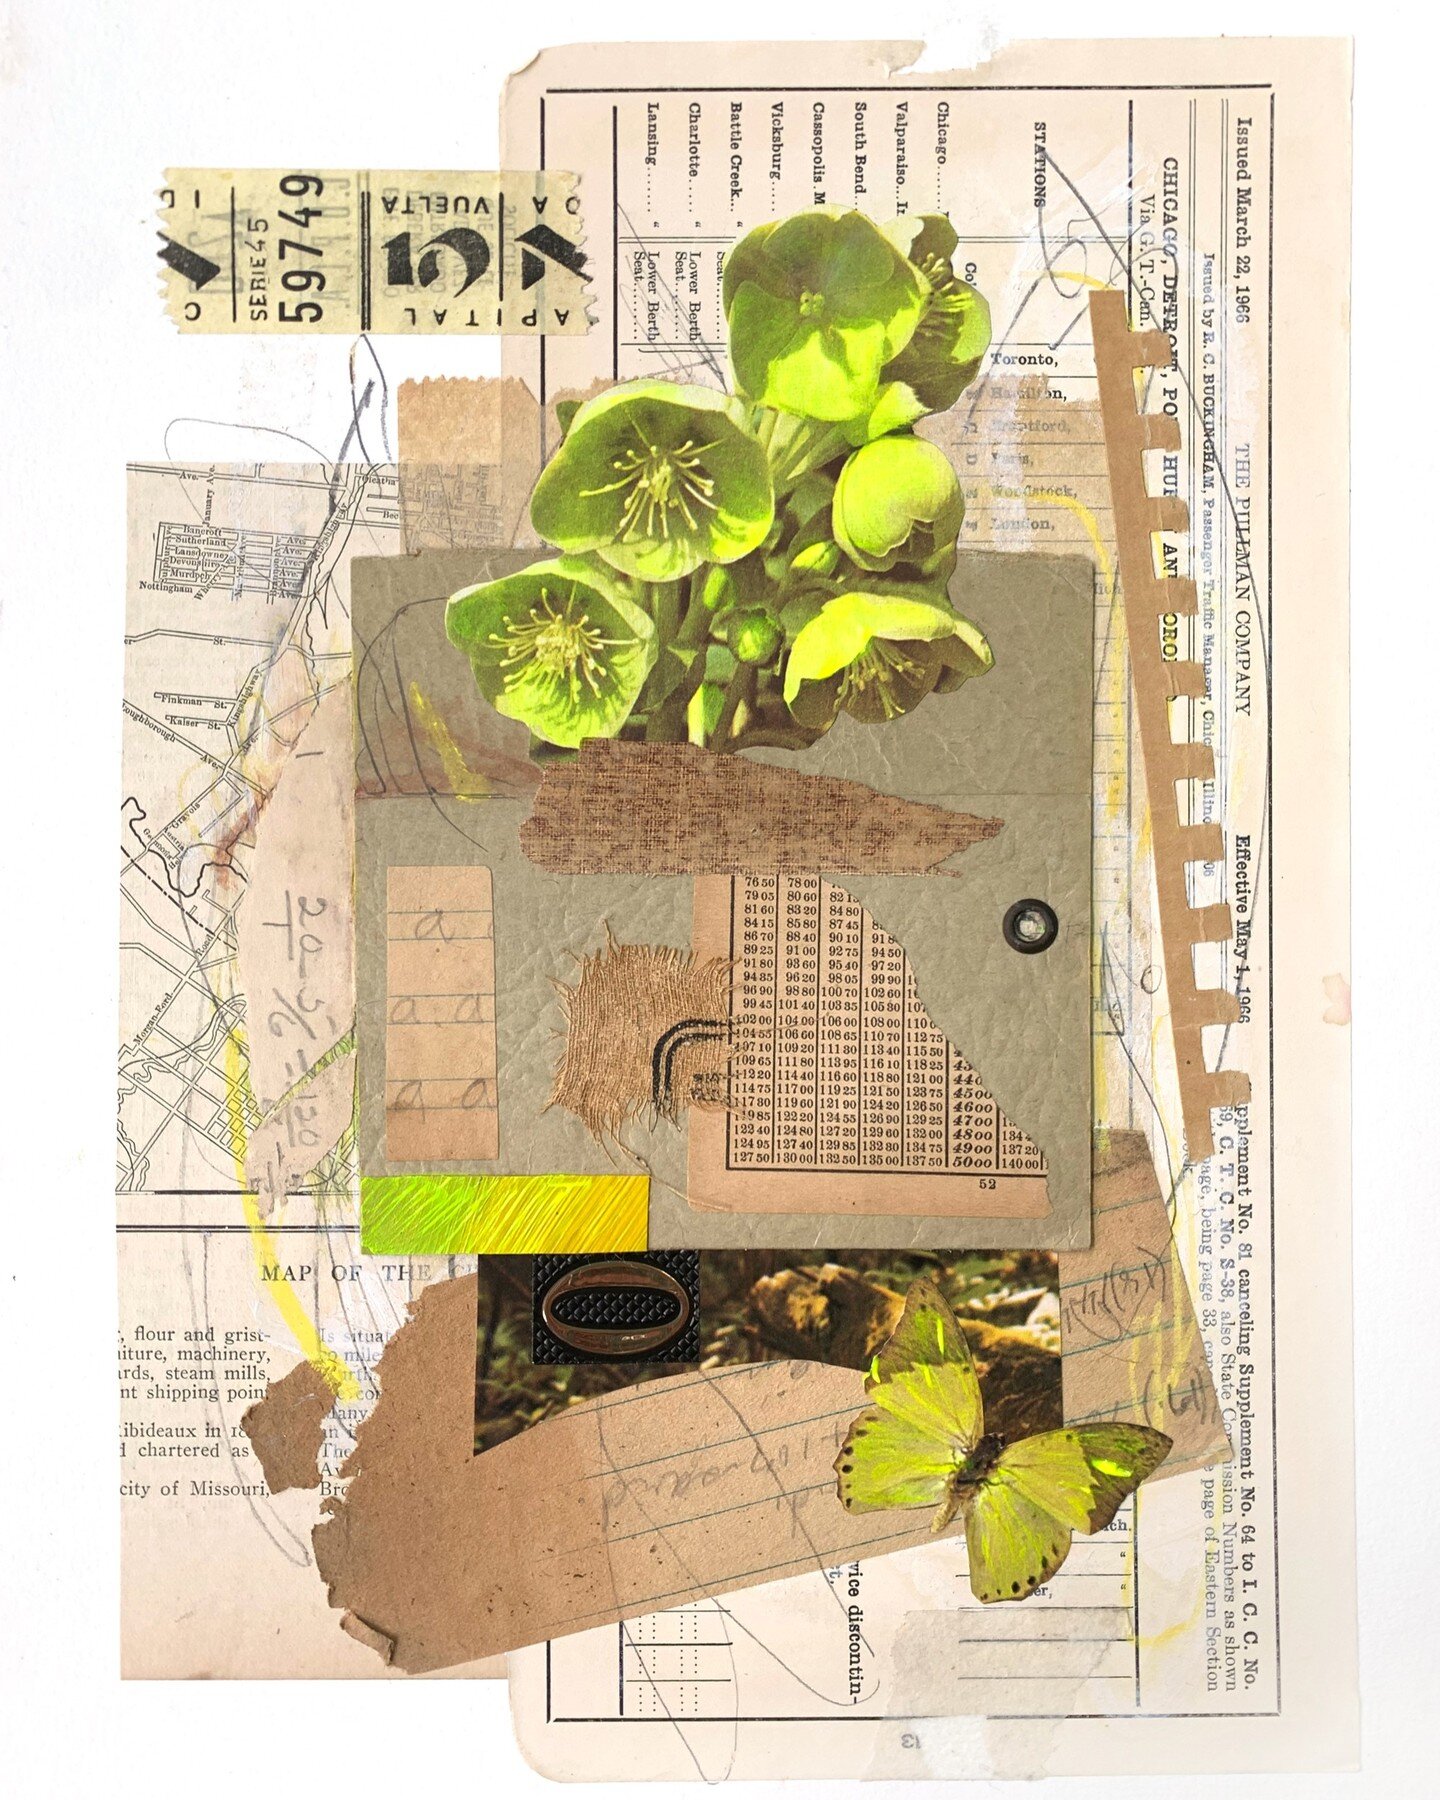 In need of some spring greens and yellows. 🌱

#collage #collageart #collageartist
#collageartwork #moderncollage #contemporarycollage 
#papercollage #analogcollage #collageonpaper #handcutcollage #handmadecollage #paperart #mixedmediaartist #cutandp